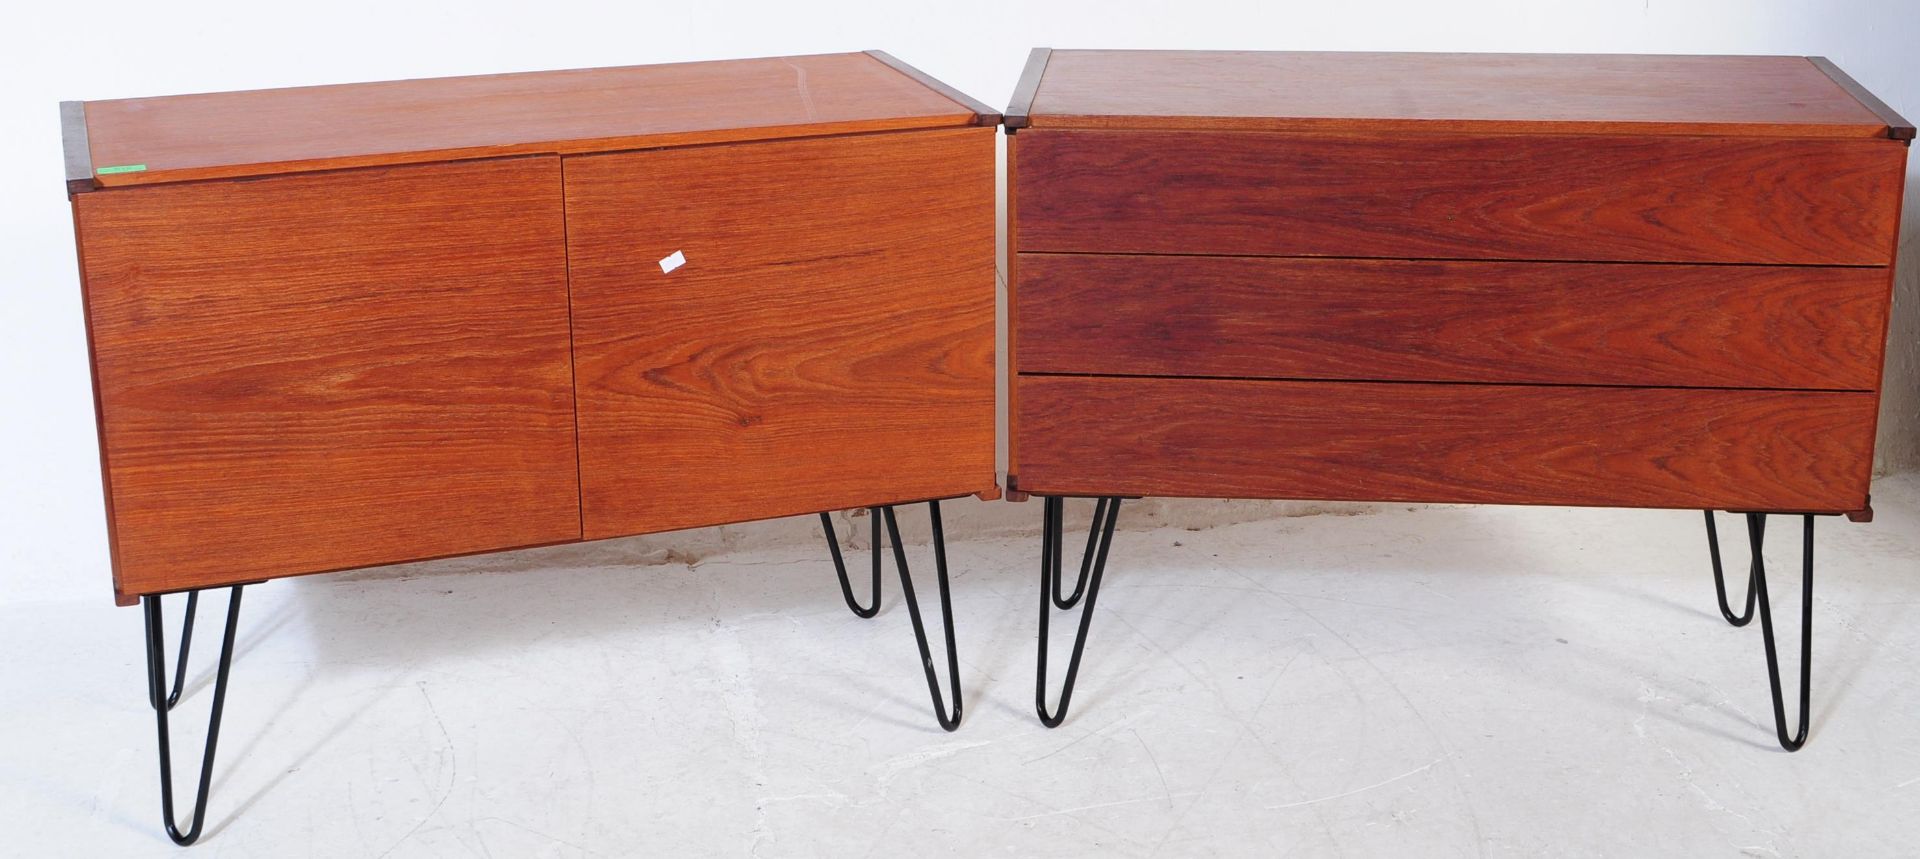 TWO MID CENTURY TEAK CHEST OF DRAWERS / CABINETS